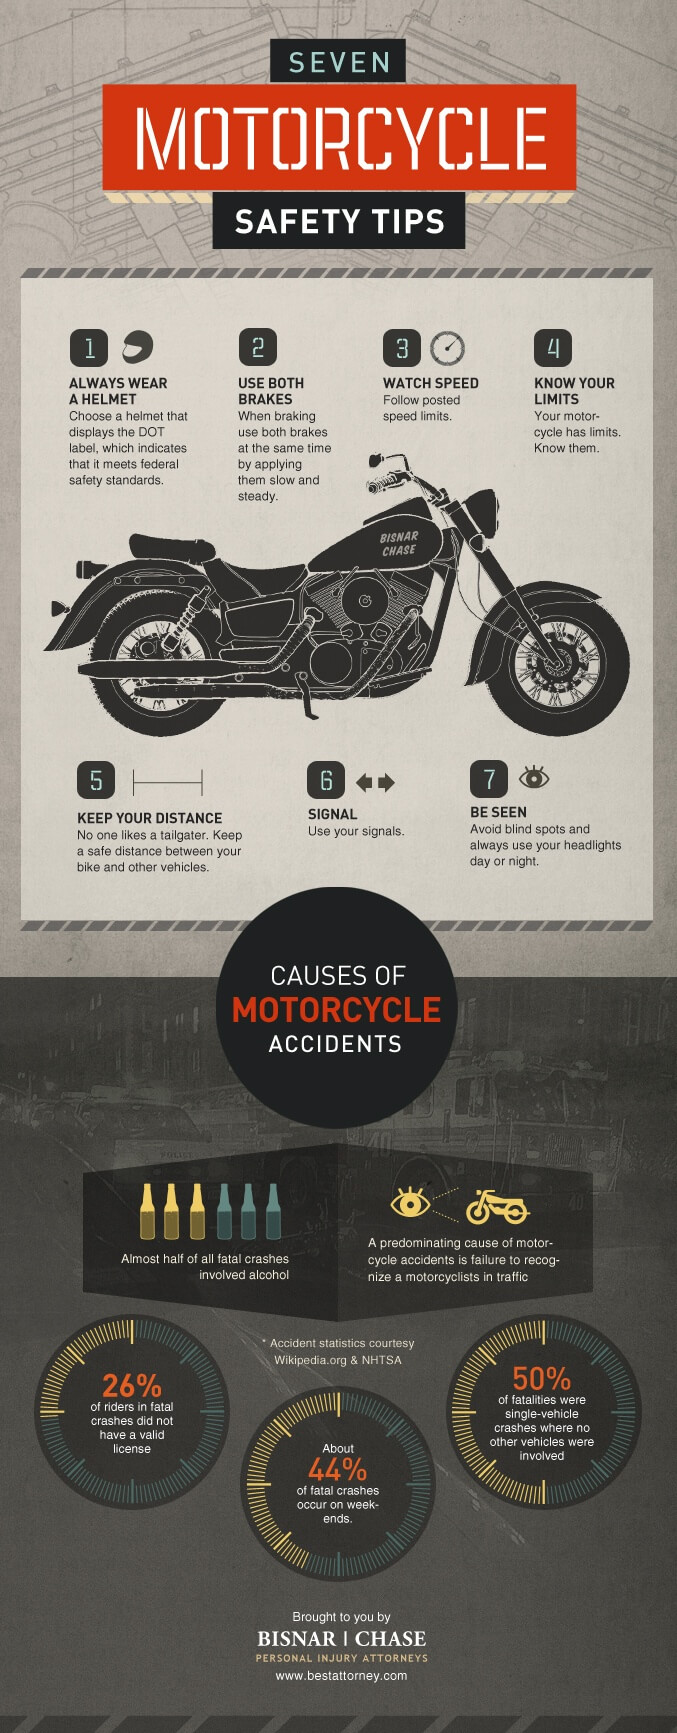 Motorcycle Safety Tips (Infographic)